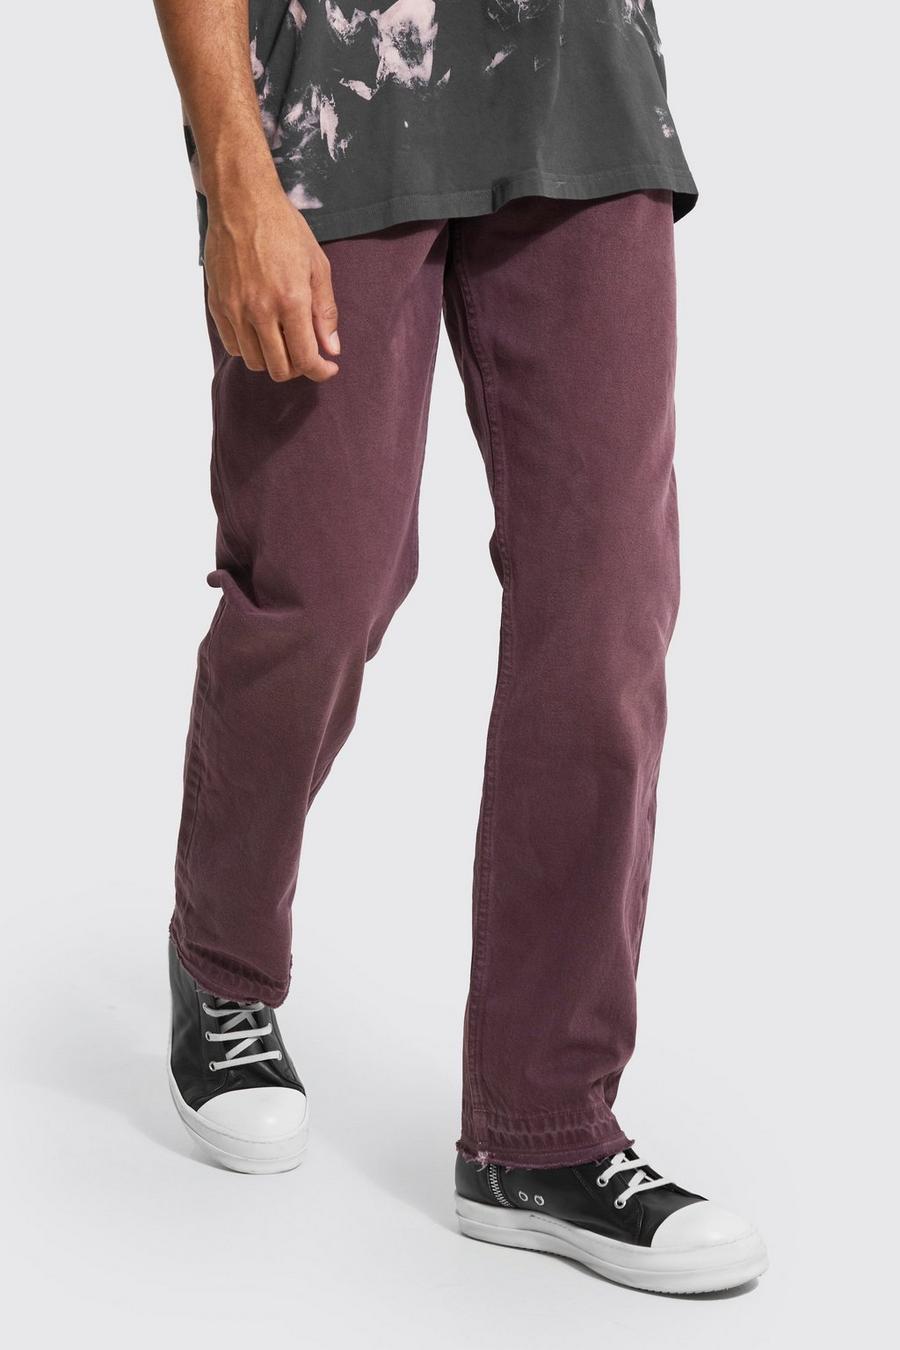 Berry rouge Baggy Overdye Jeans